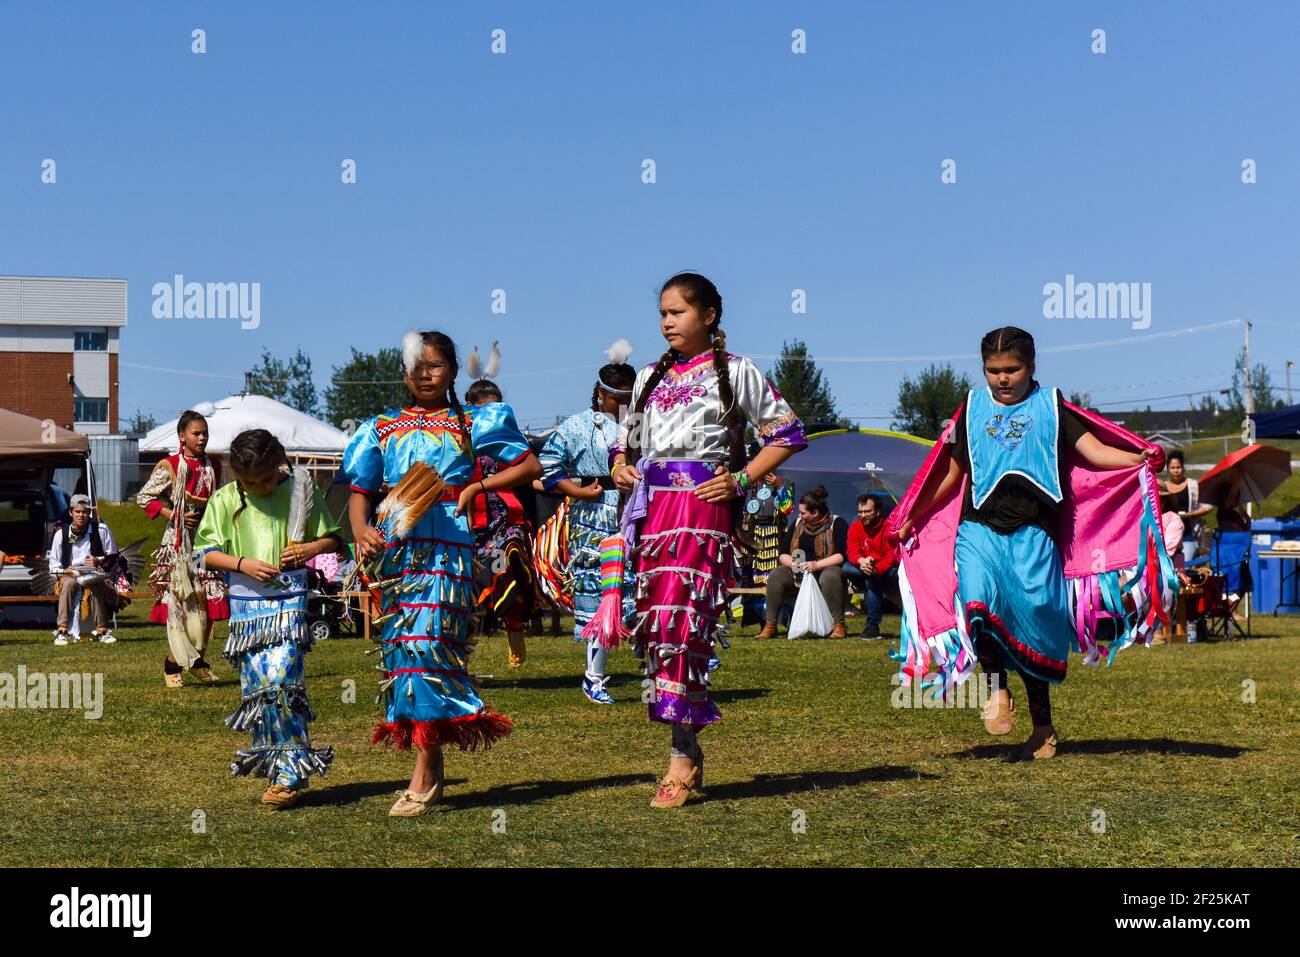 Dancers, Pow-Wow Native Ceremony, Northern Quebec, Canada Stock Photo